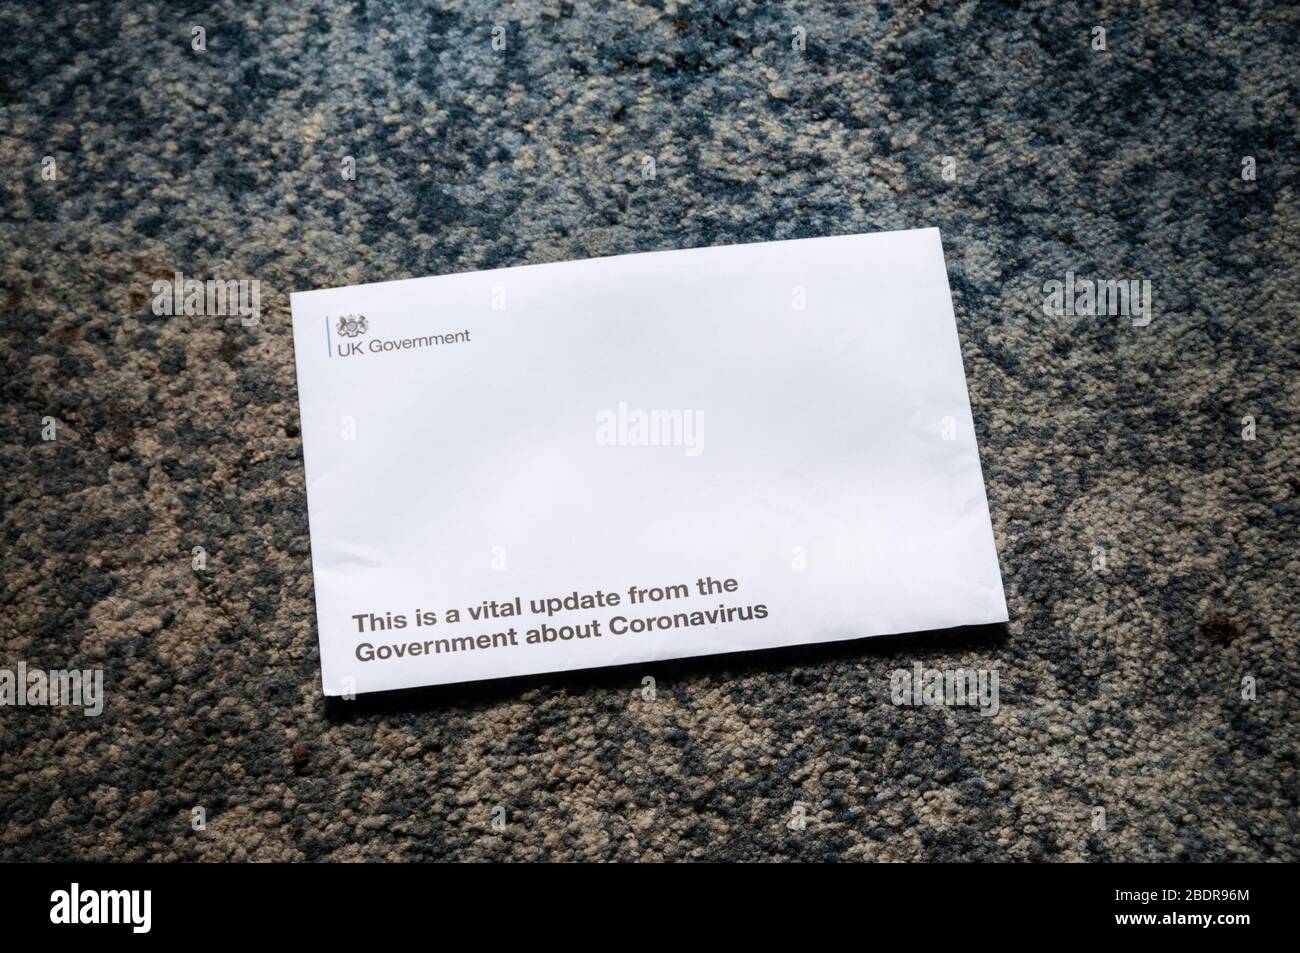 09 April 2020. Norfolk, UK.  A letter arrives from the UK government with an update about the Coronavirus pandemic. Credit: UrbanImages-News/Alamy Stock Photo